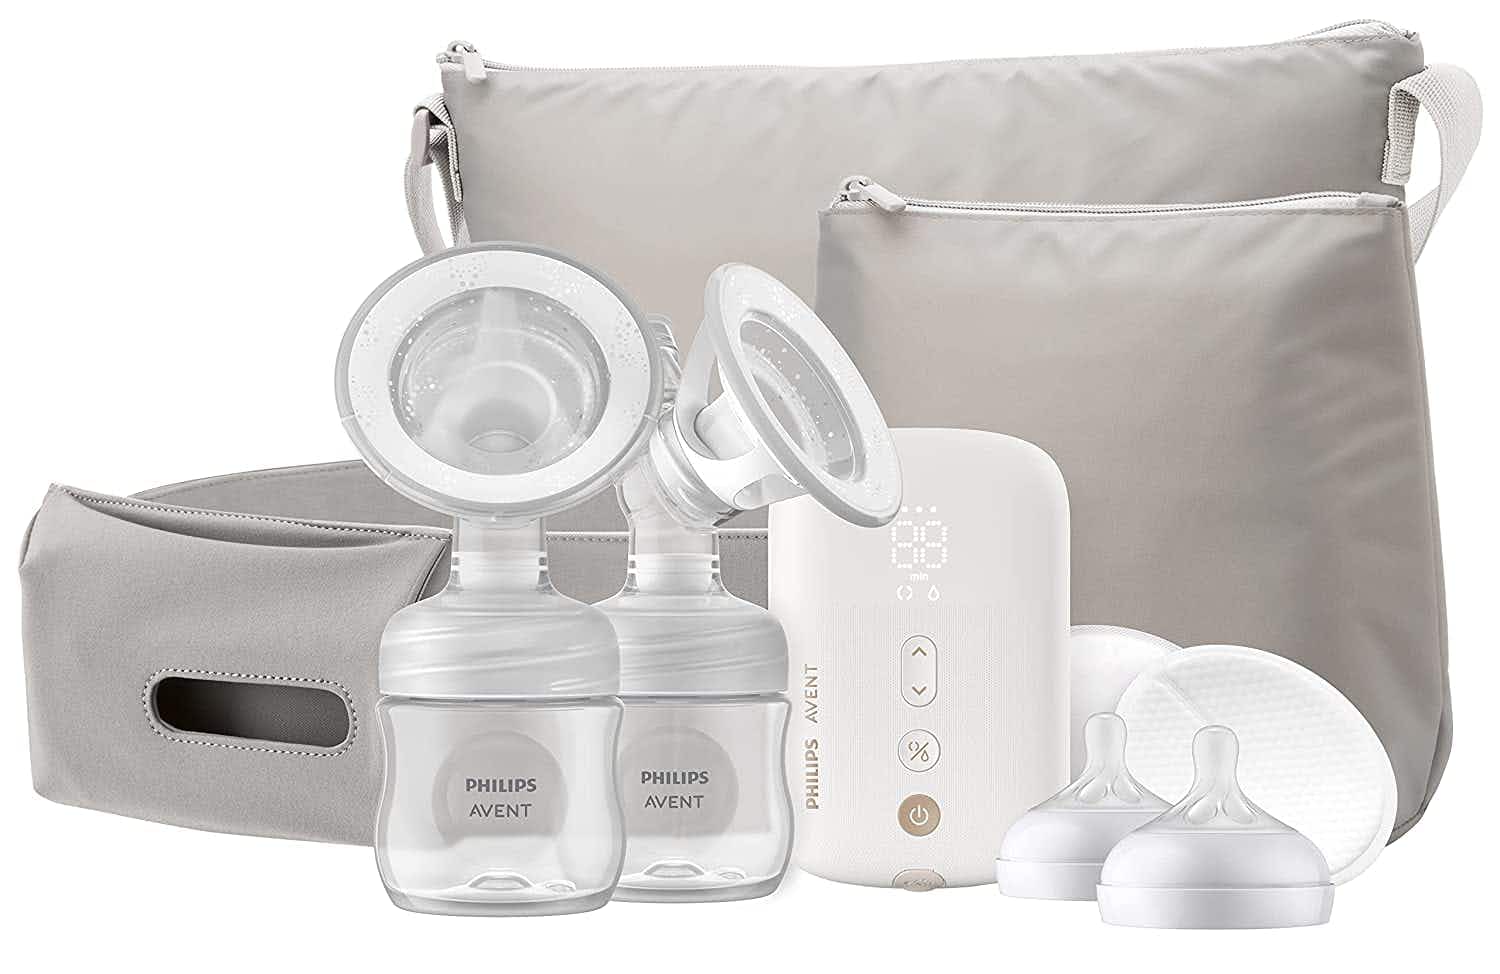 A Philips Avent Advanced breast pump and accessories on a white background.